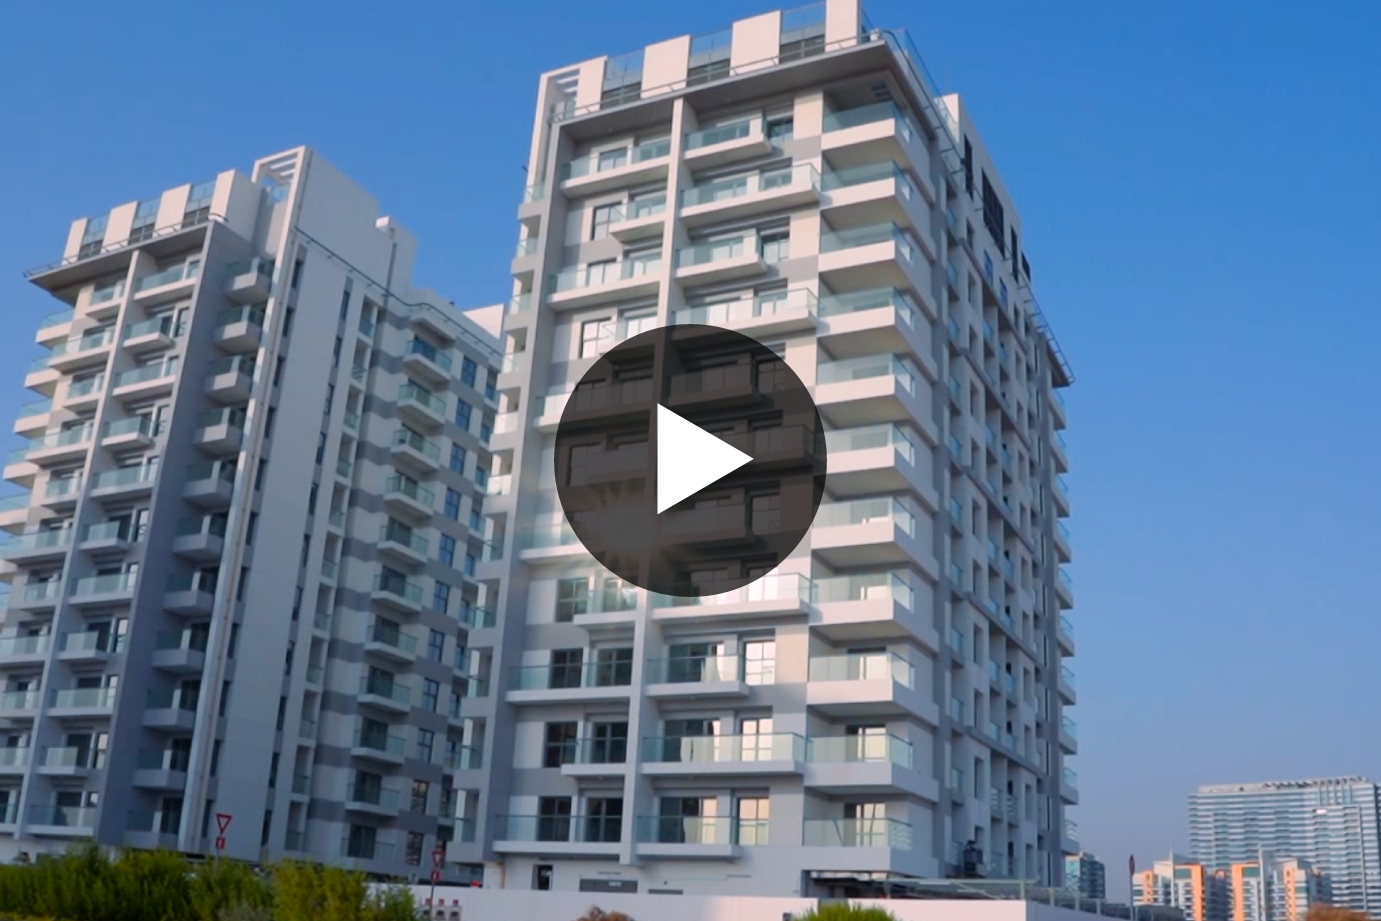 GBH G+11 Building Project Video by Sajid Sulaiman